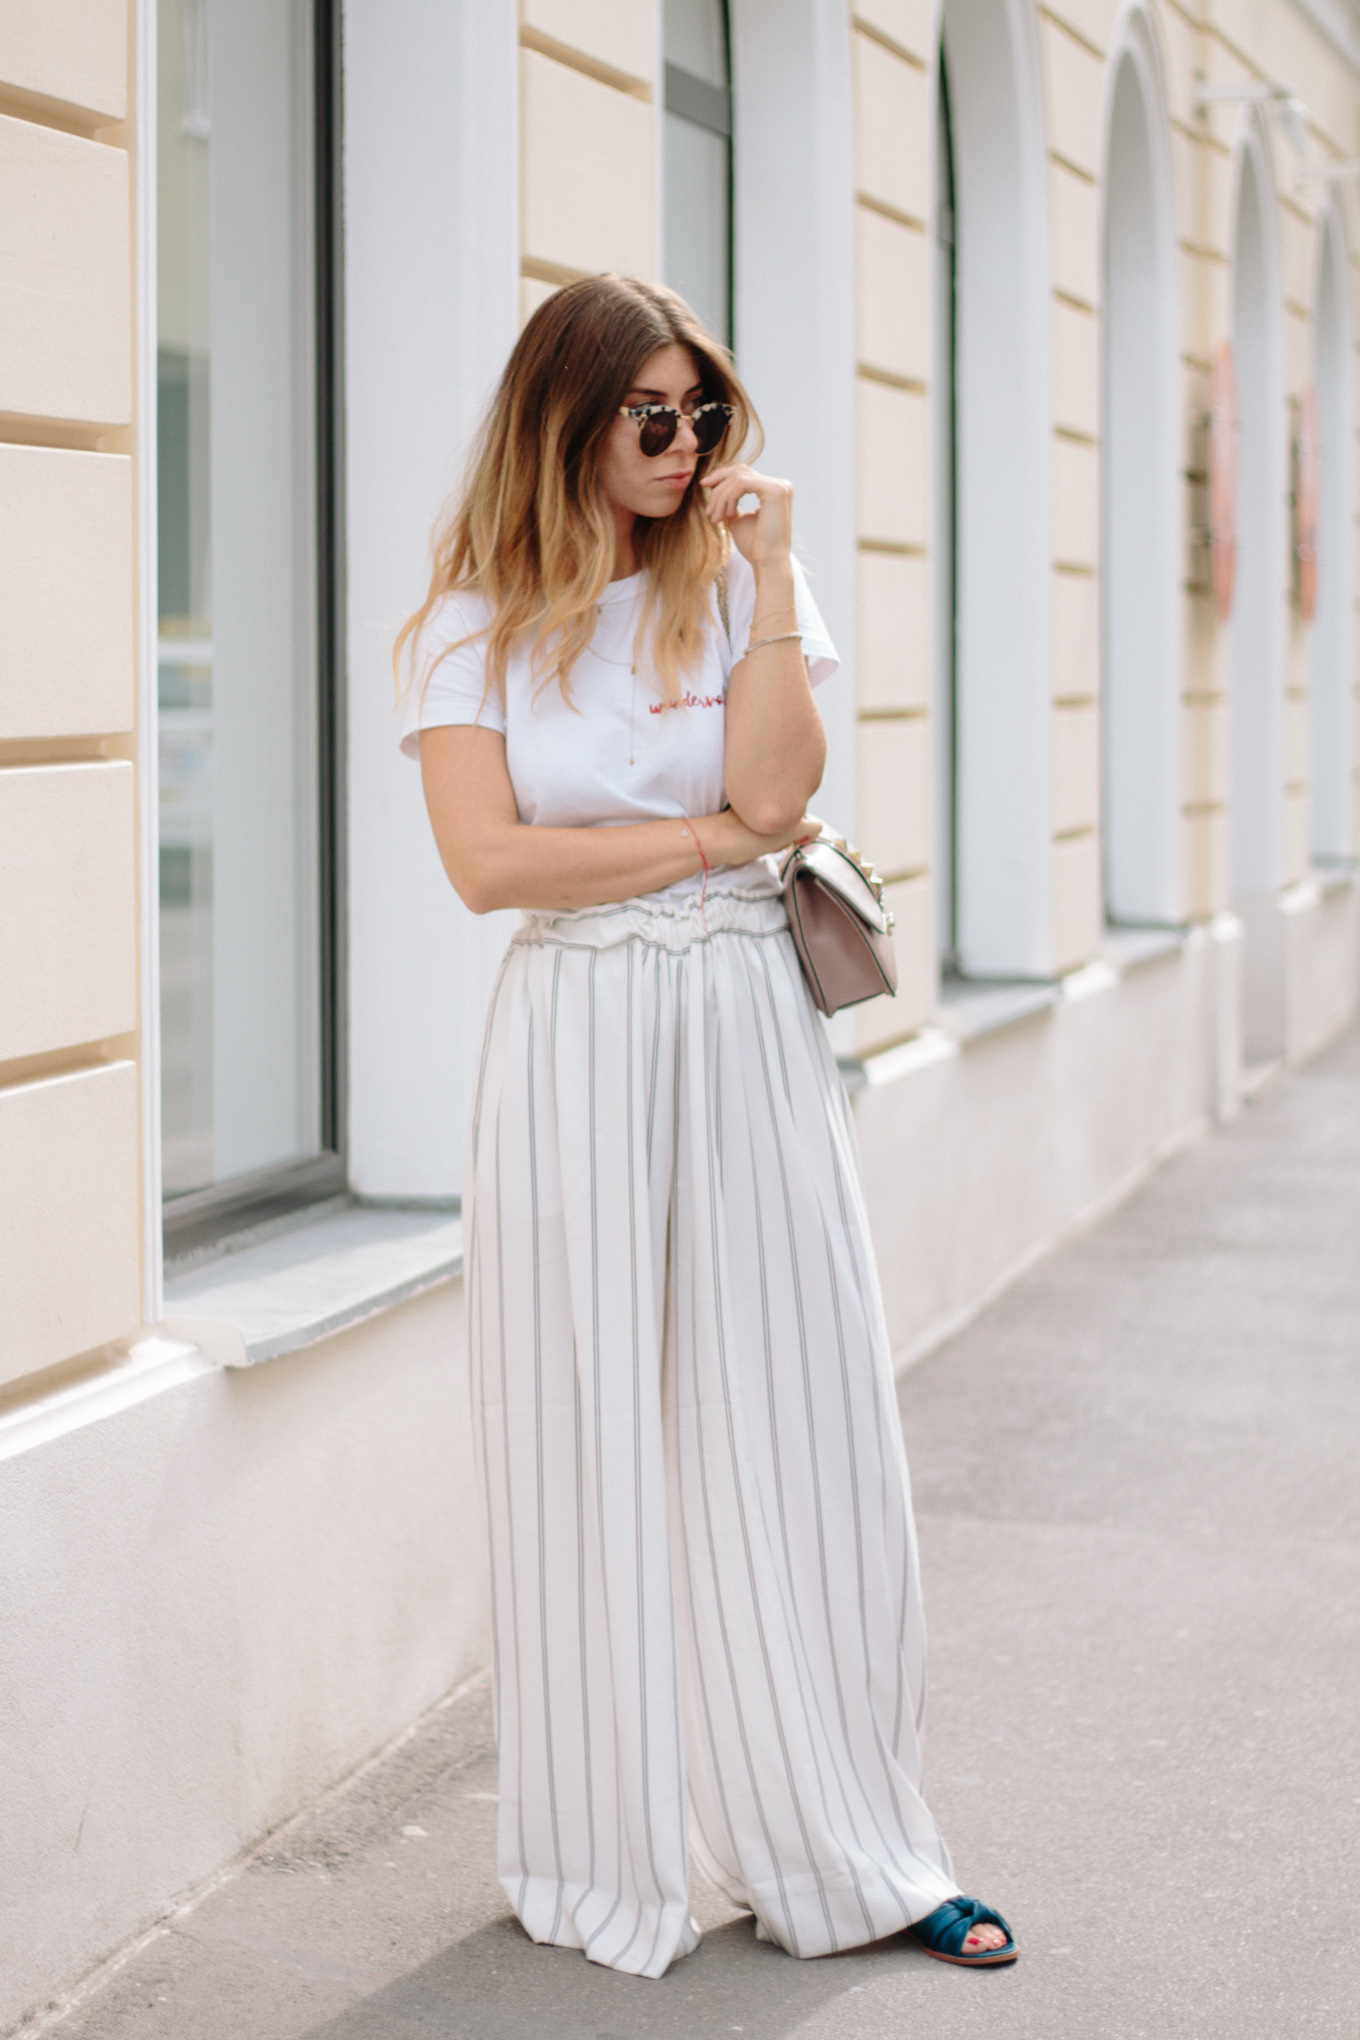 All White Outfit | The Daily Dose